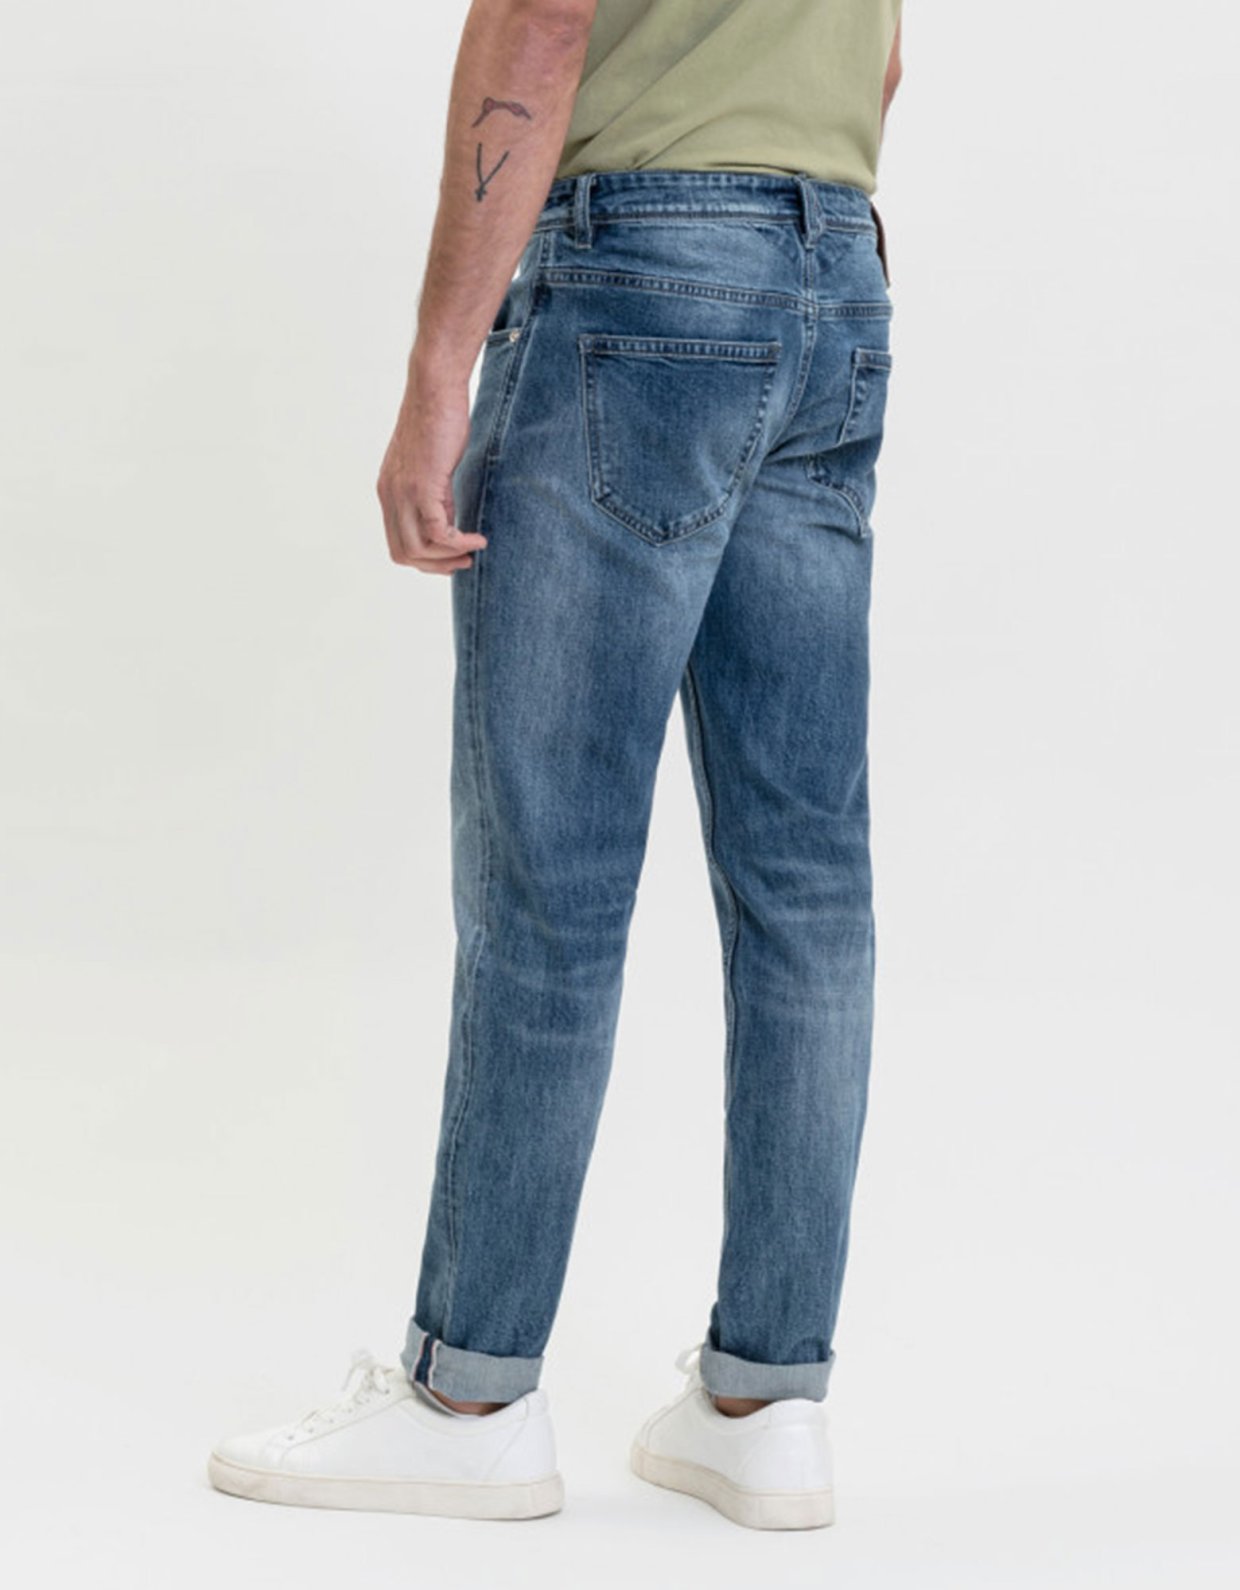 Gianni Lupo Kevin skinny fit medium wash jeans